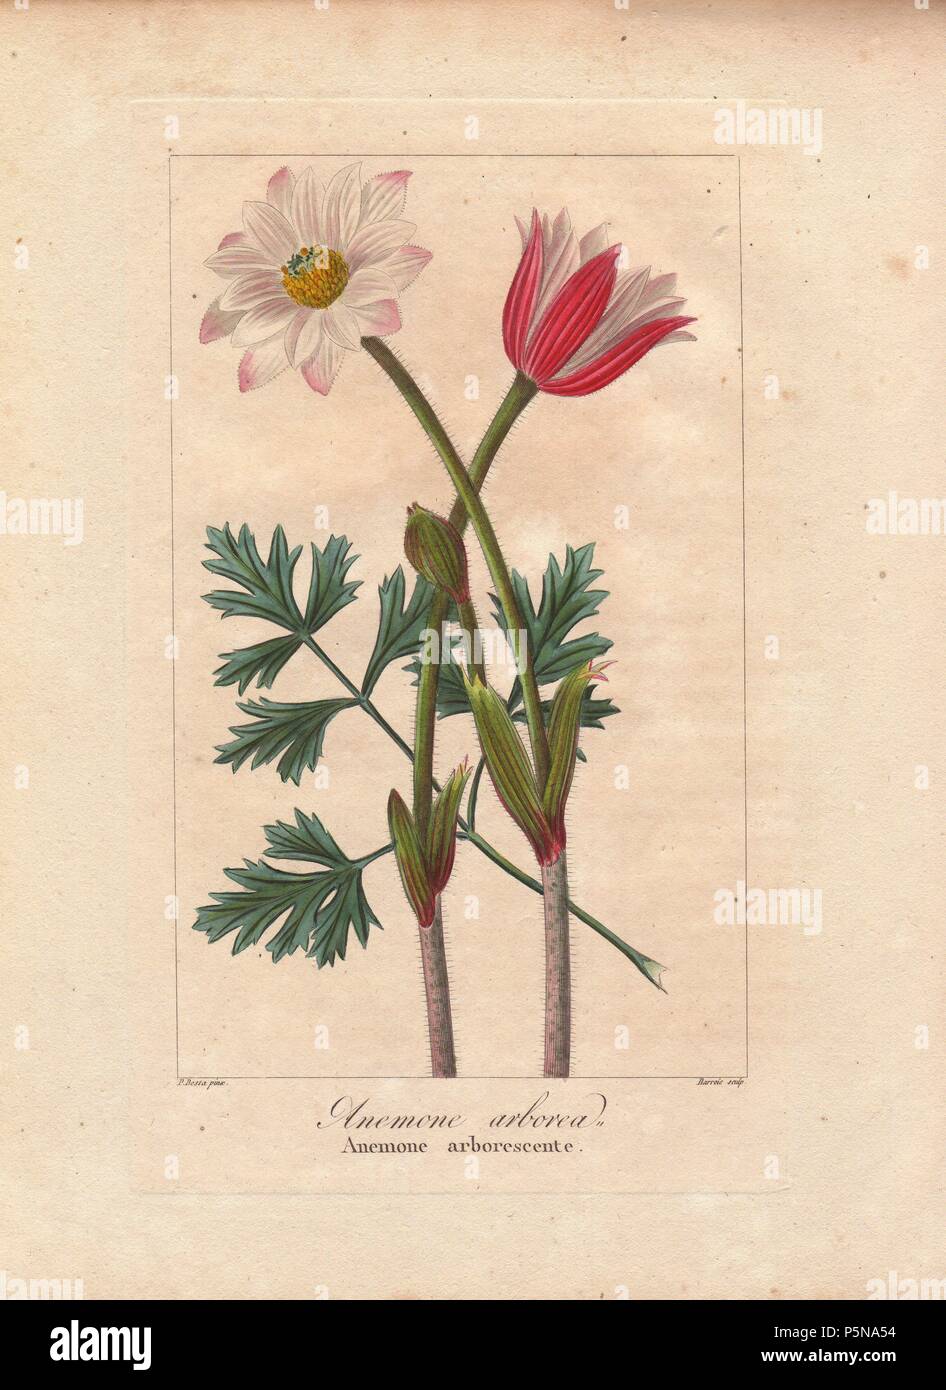 Cape anemone, Anemone tenuifolia, native to South Africa. Handcoloured stipple engraving on copper by Barrois from a botanical illustration by Pancrace Bessa from Mordant de Launay's 'Herbier General de l'Amateur,' Audot, Paris, 1820. The Herbier was published from 1810 to 1827 and edited by Mordant de Launay and Loiseleur-Deslongchamps. Bessa (1772-1830s), along with Redoute and Turpin, is considered one of the greatest French botanical artists of the 19th century. Stock Photo